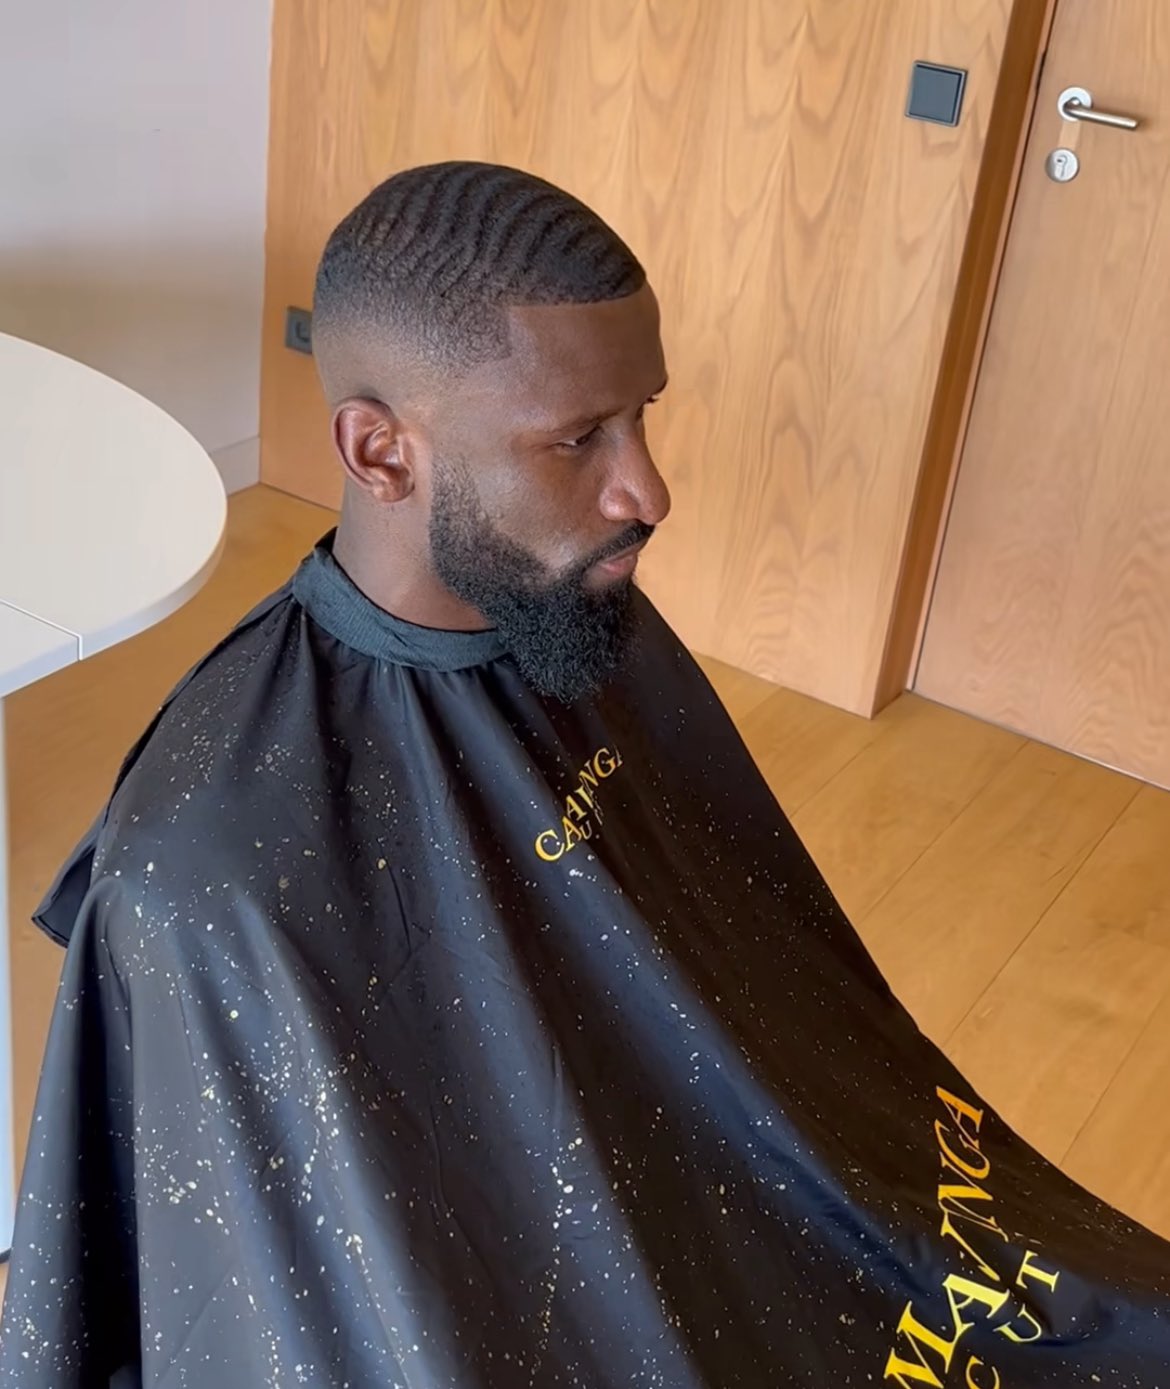 Real Madrid News on X: "Both Jude Bellingham & Antonio Rüdiger got haircuts  at Camavinga's brother's barber ahead of the team's trip to Saudi Arabia  for the Spanish Super Cup. ️ https://t.co/lBQg7CfKJK" /